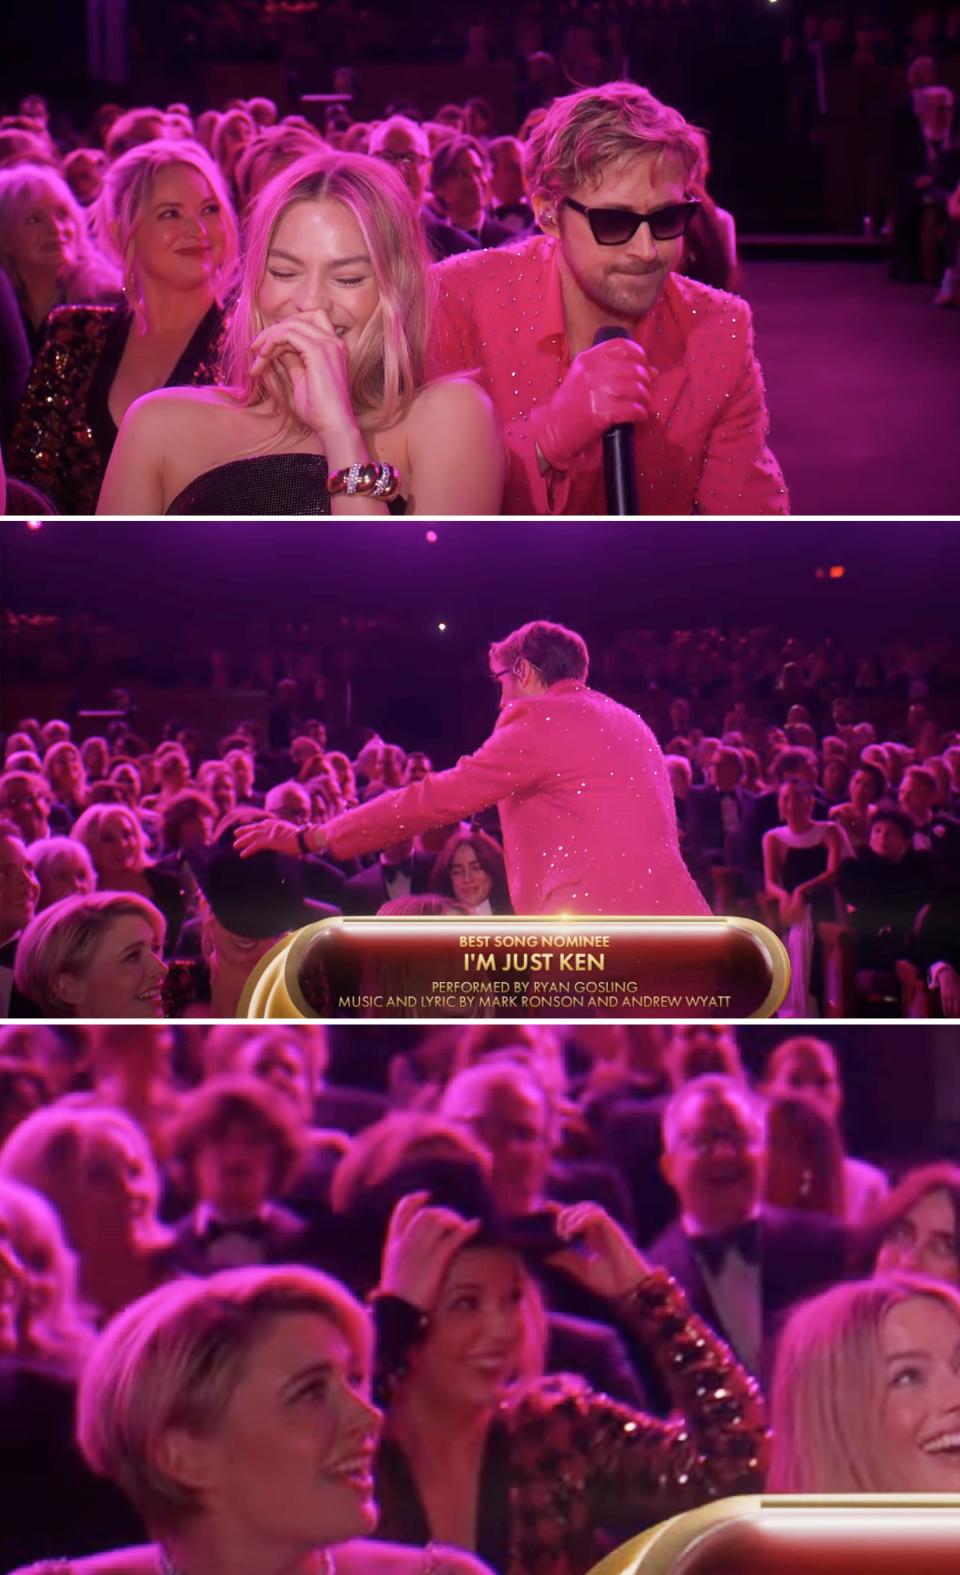 Ryan attended the Oscars, where he was nominated for Best Supporting Actor for Barbie, alongside Mandi and their parents.